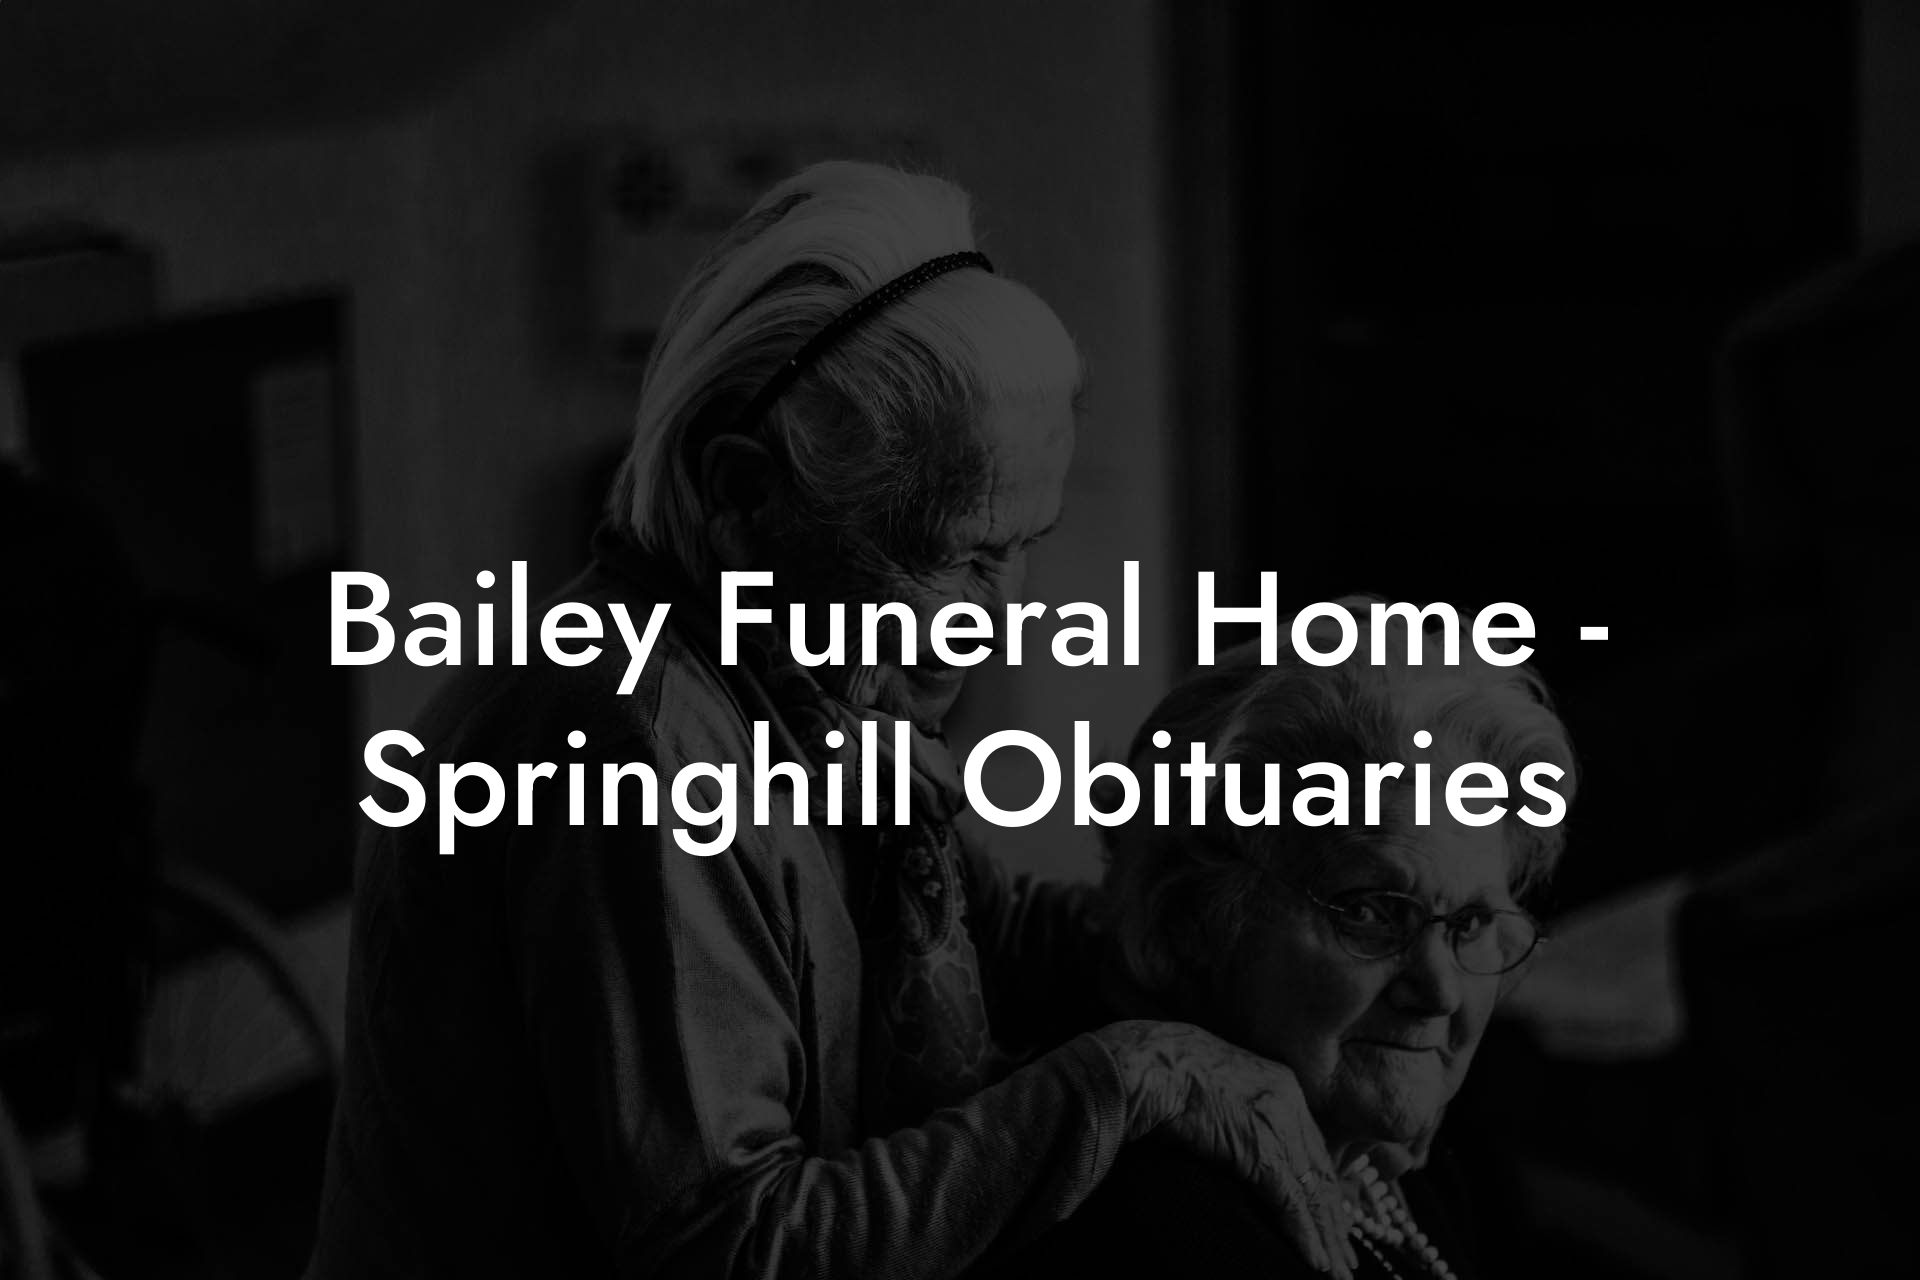 Bailey Funeral Home - Springhill Obituaries